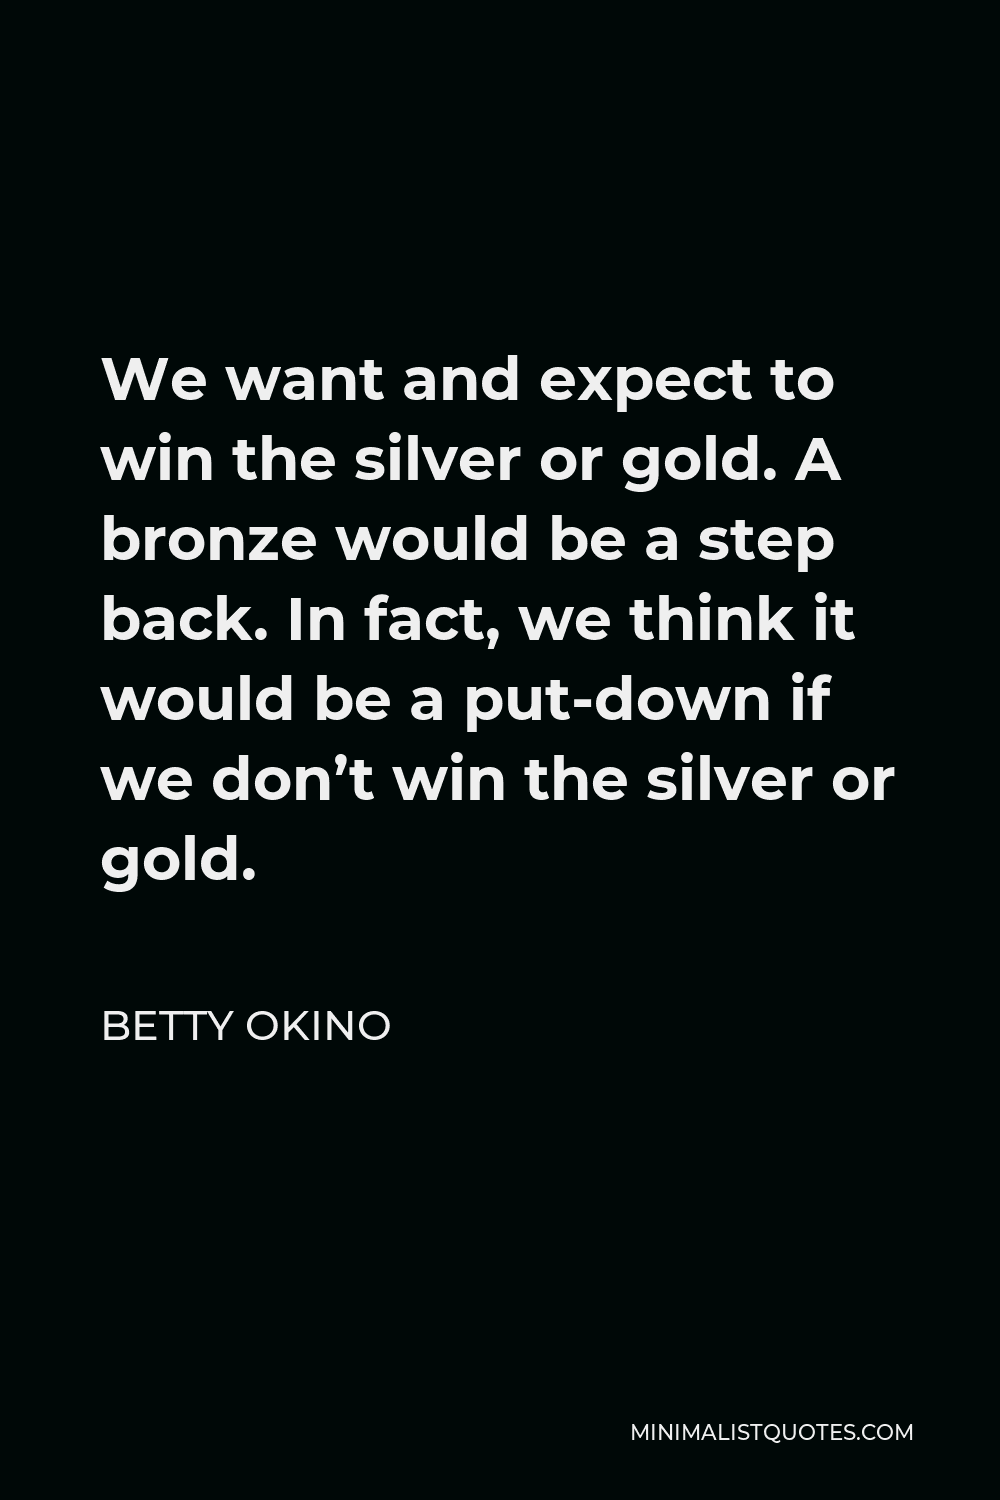 Betty Okino Quote - We want and expect to win the silver or gold. A bronze would be a step back. In fact, we think it would be a put-down if we don’t win the silver or gold.